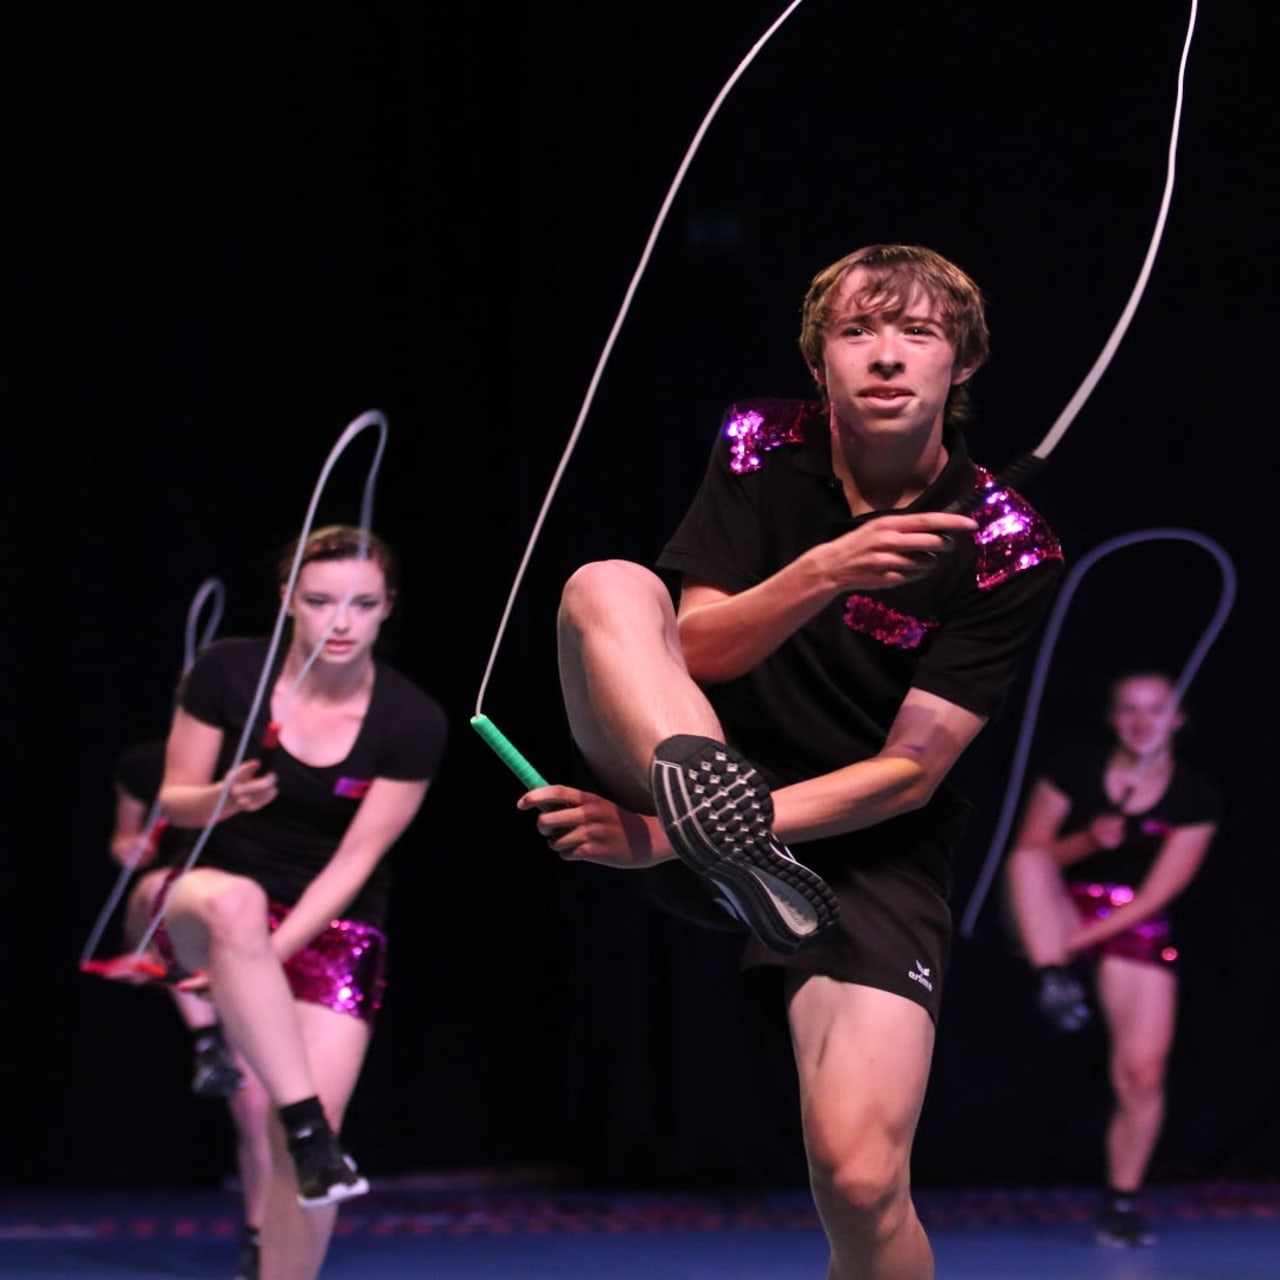 The World Jump Rope Championships are in Colorado Springs. For